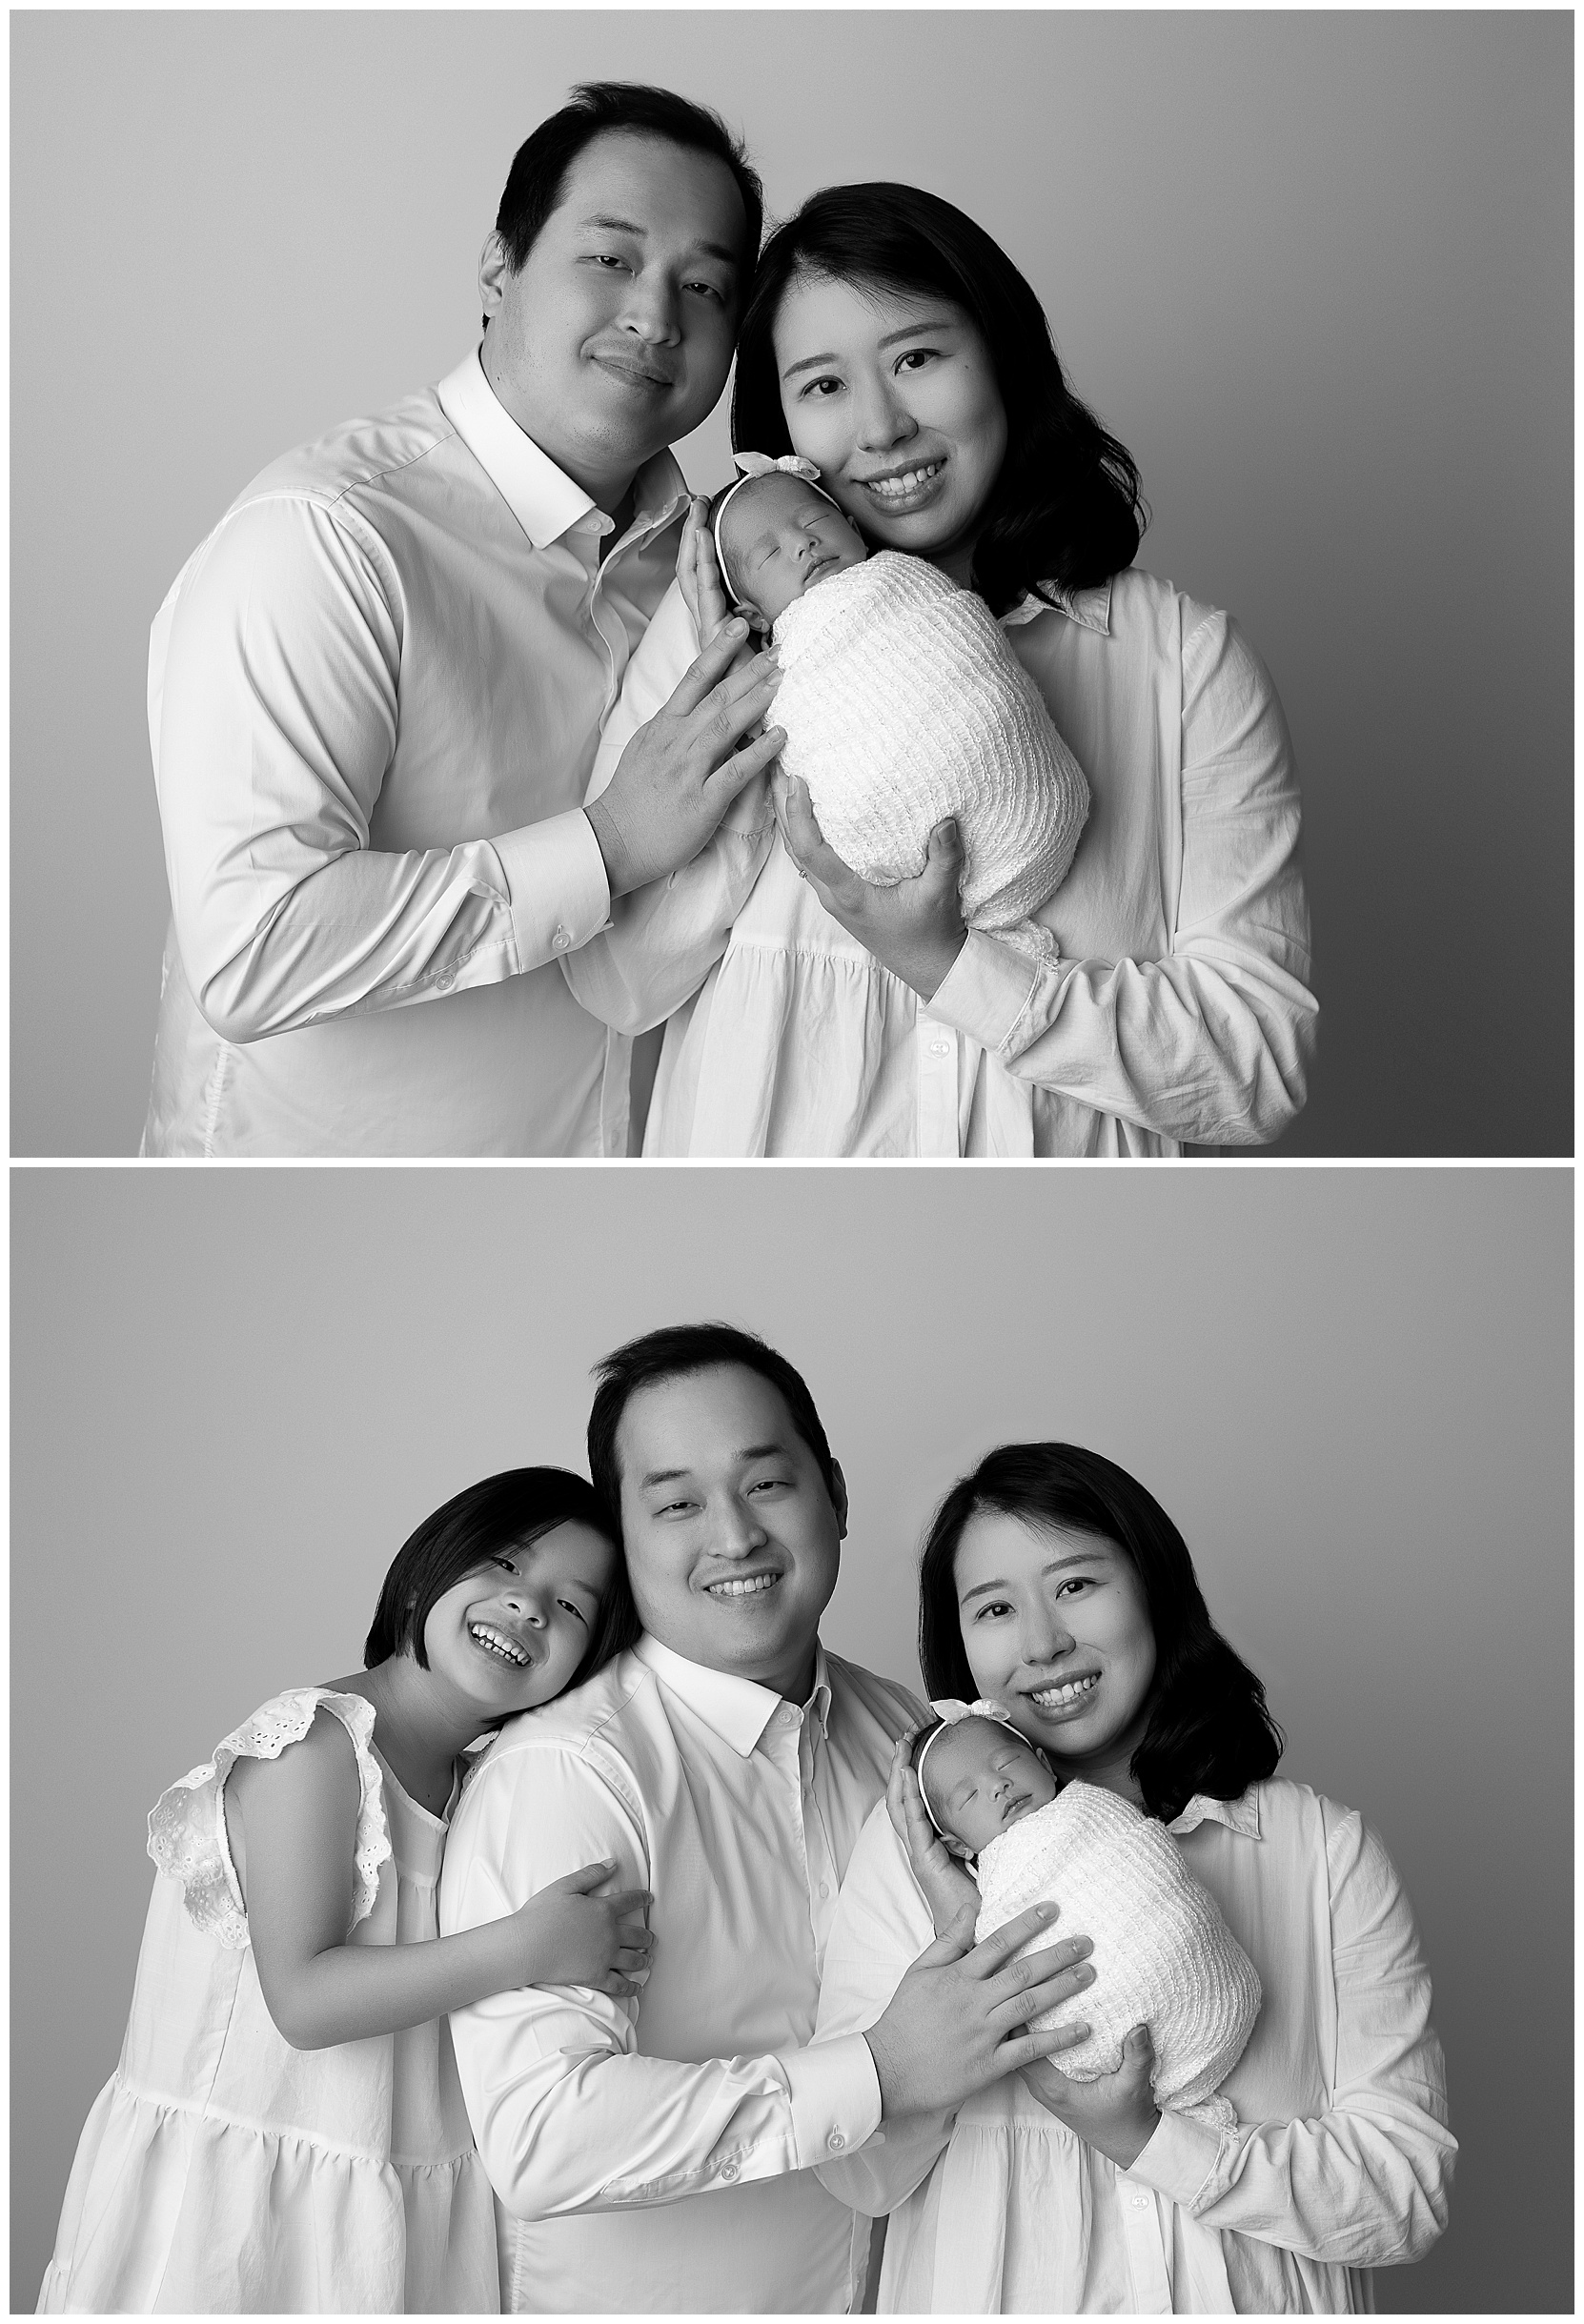 Two black and white family photos. Top photo features a man and a woman holding their newborn baby together. Bottom photo features a little girl, man, woman, and newborn baby posing together. 